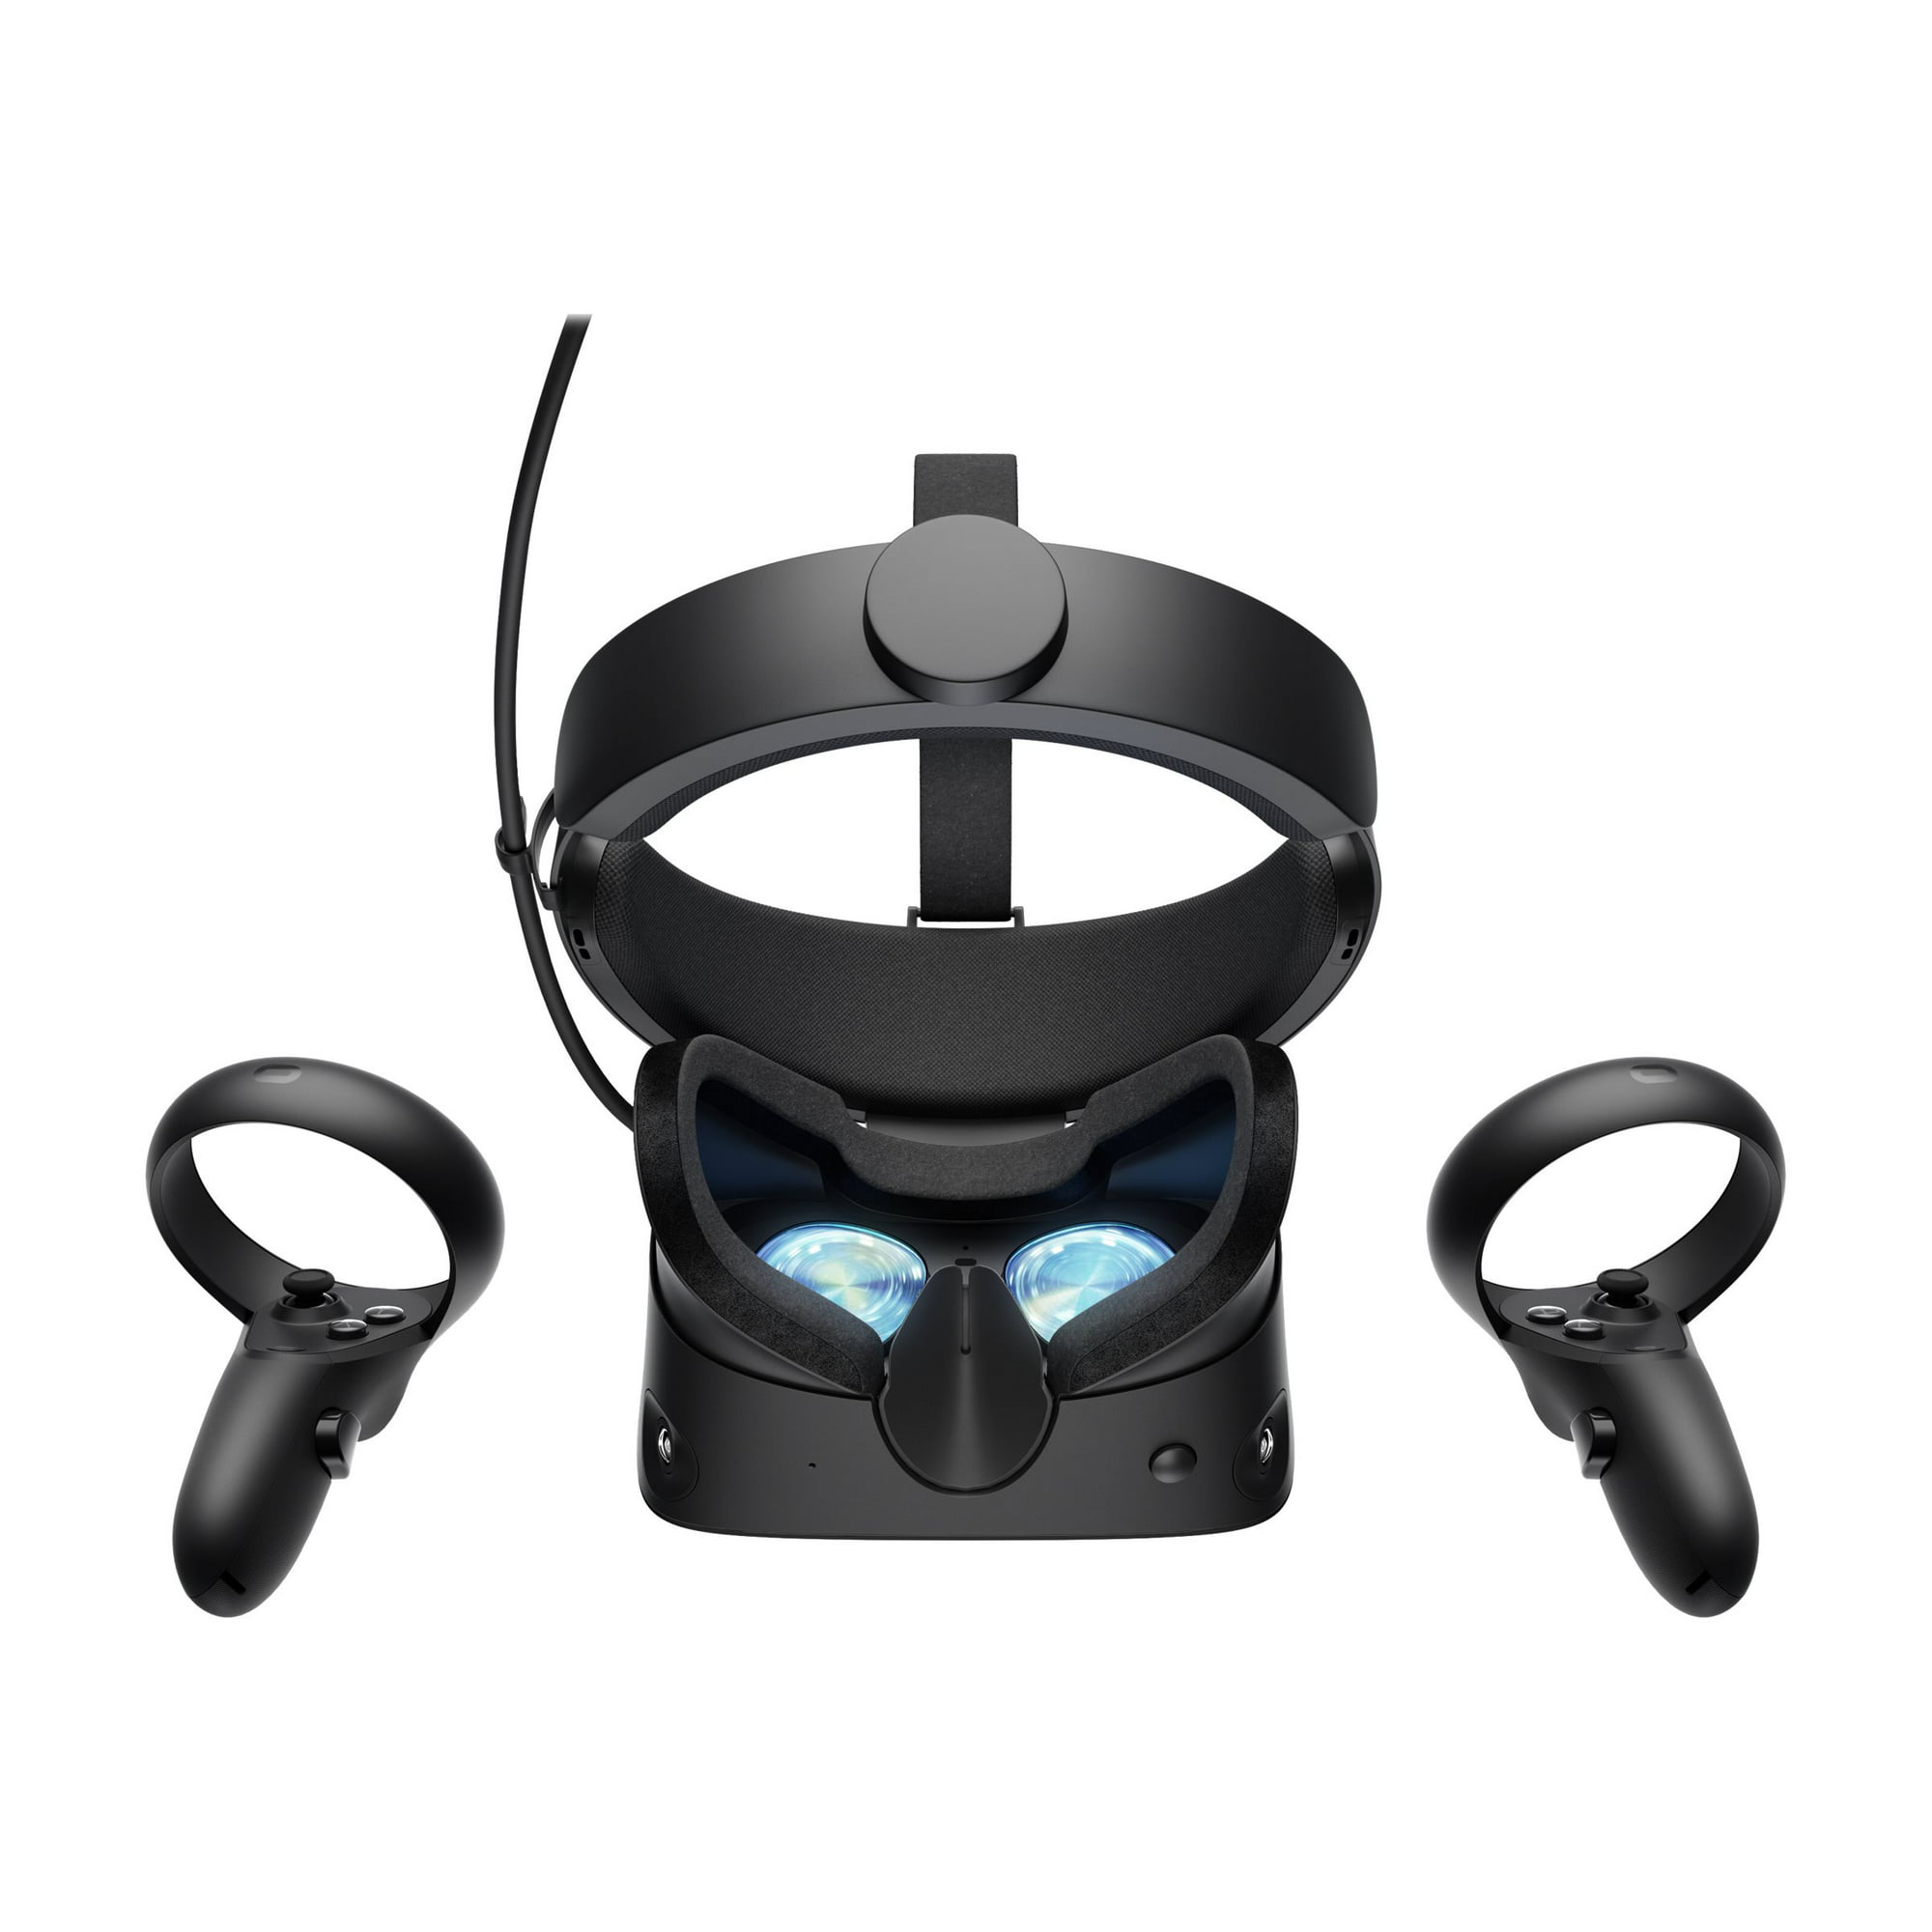 Oculus Rift S PC-Powered VR Gaming Headset - image 3 of 4